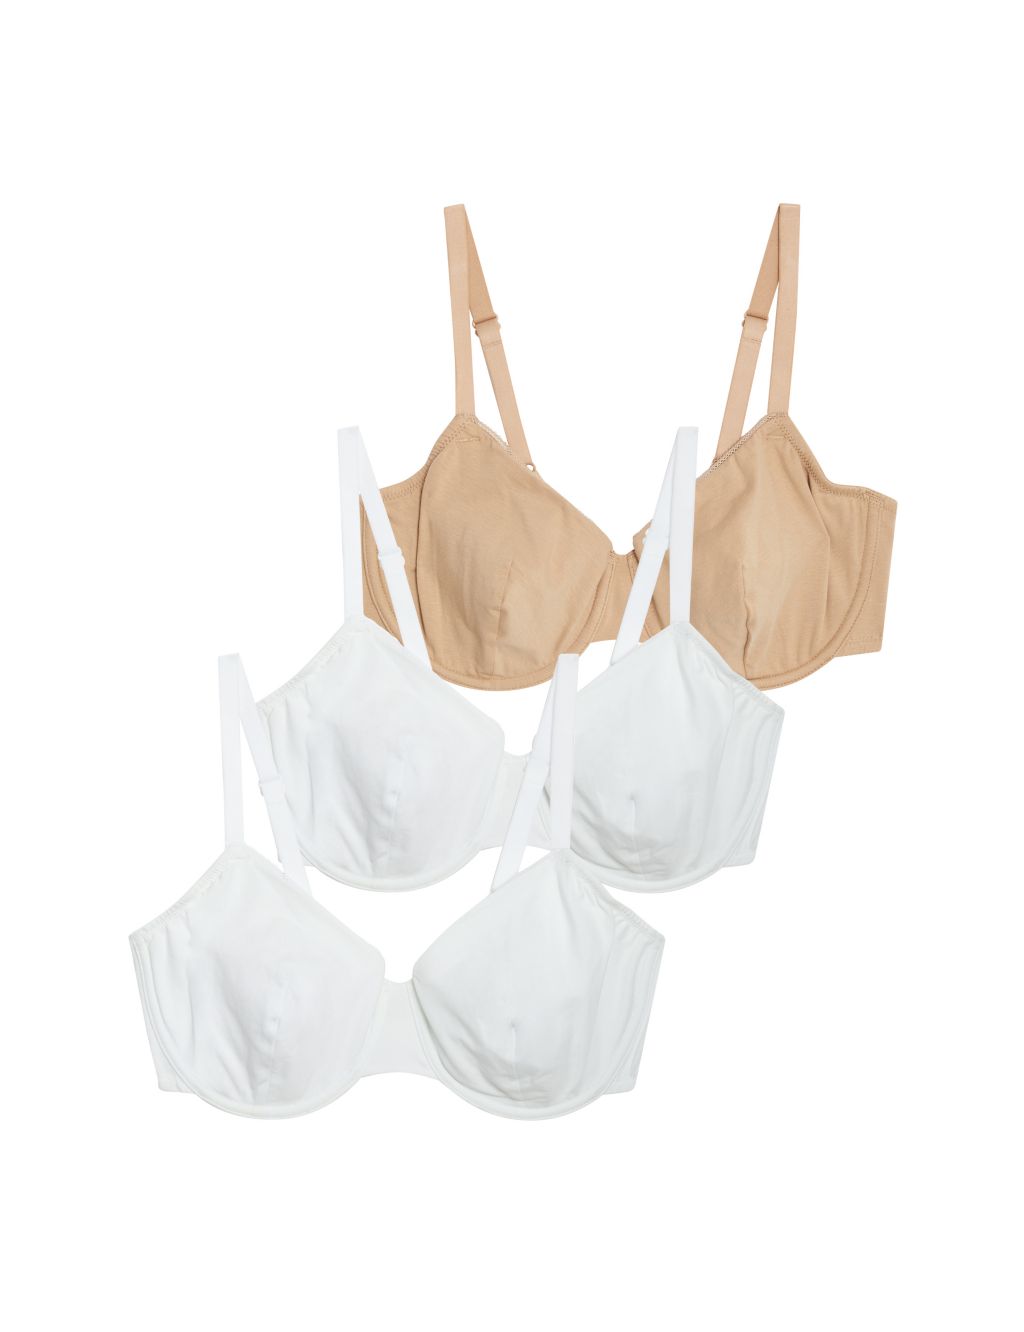 MARKS & SPENCER'S BNWT Pack of 3 Full Cup Bras Size 40 E £12.00 - PicClick  UK